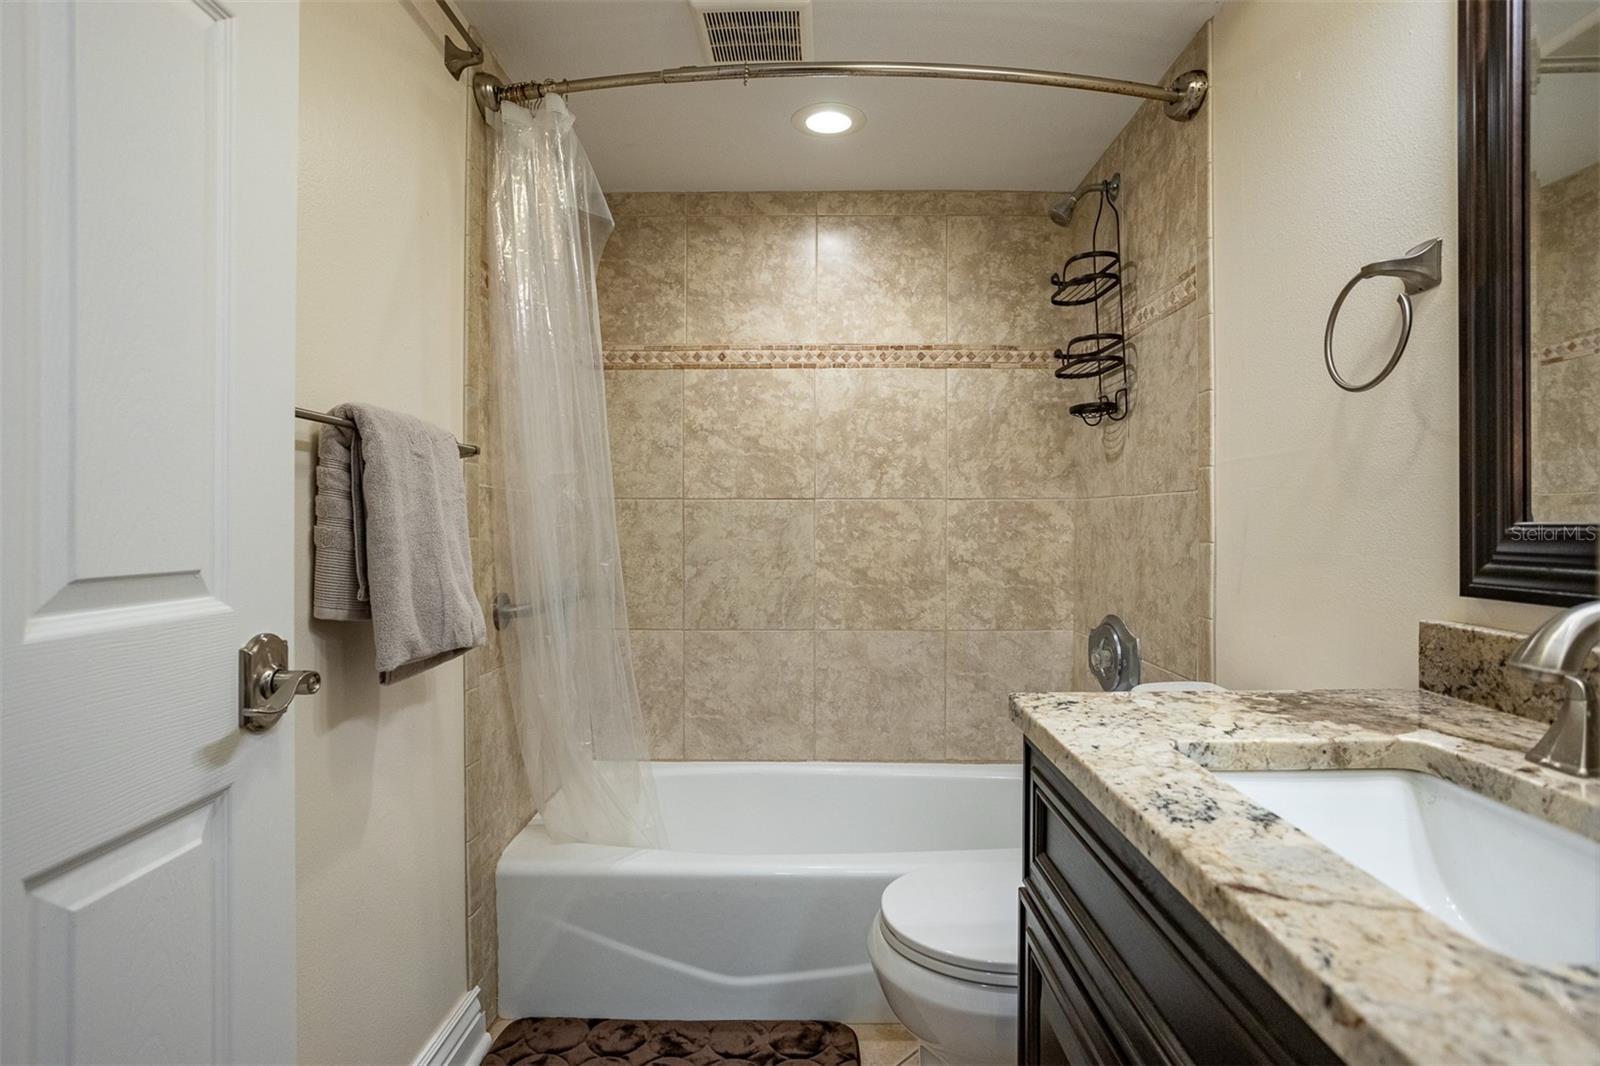 Second bathroom with updated tile and fixtures